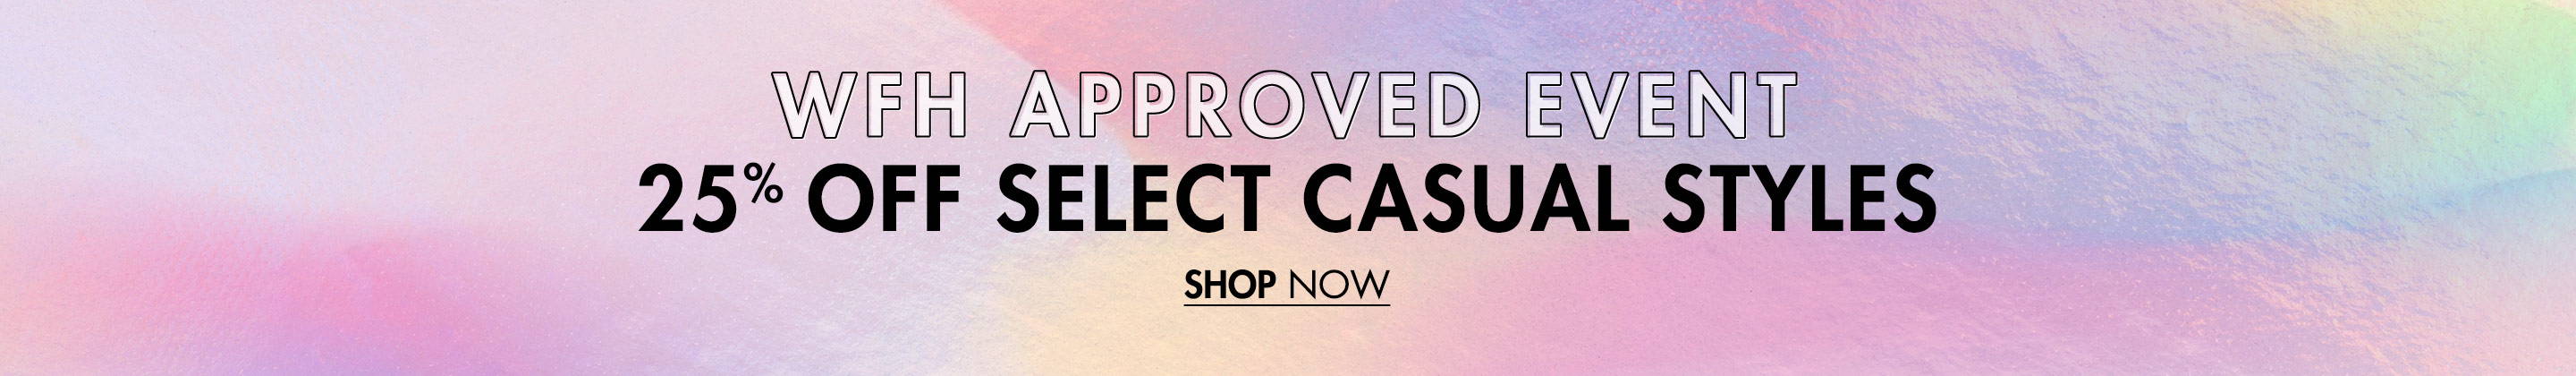 25% Off Select Casual Styles